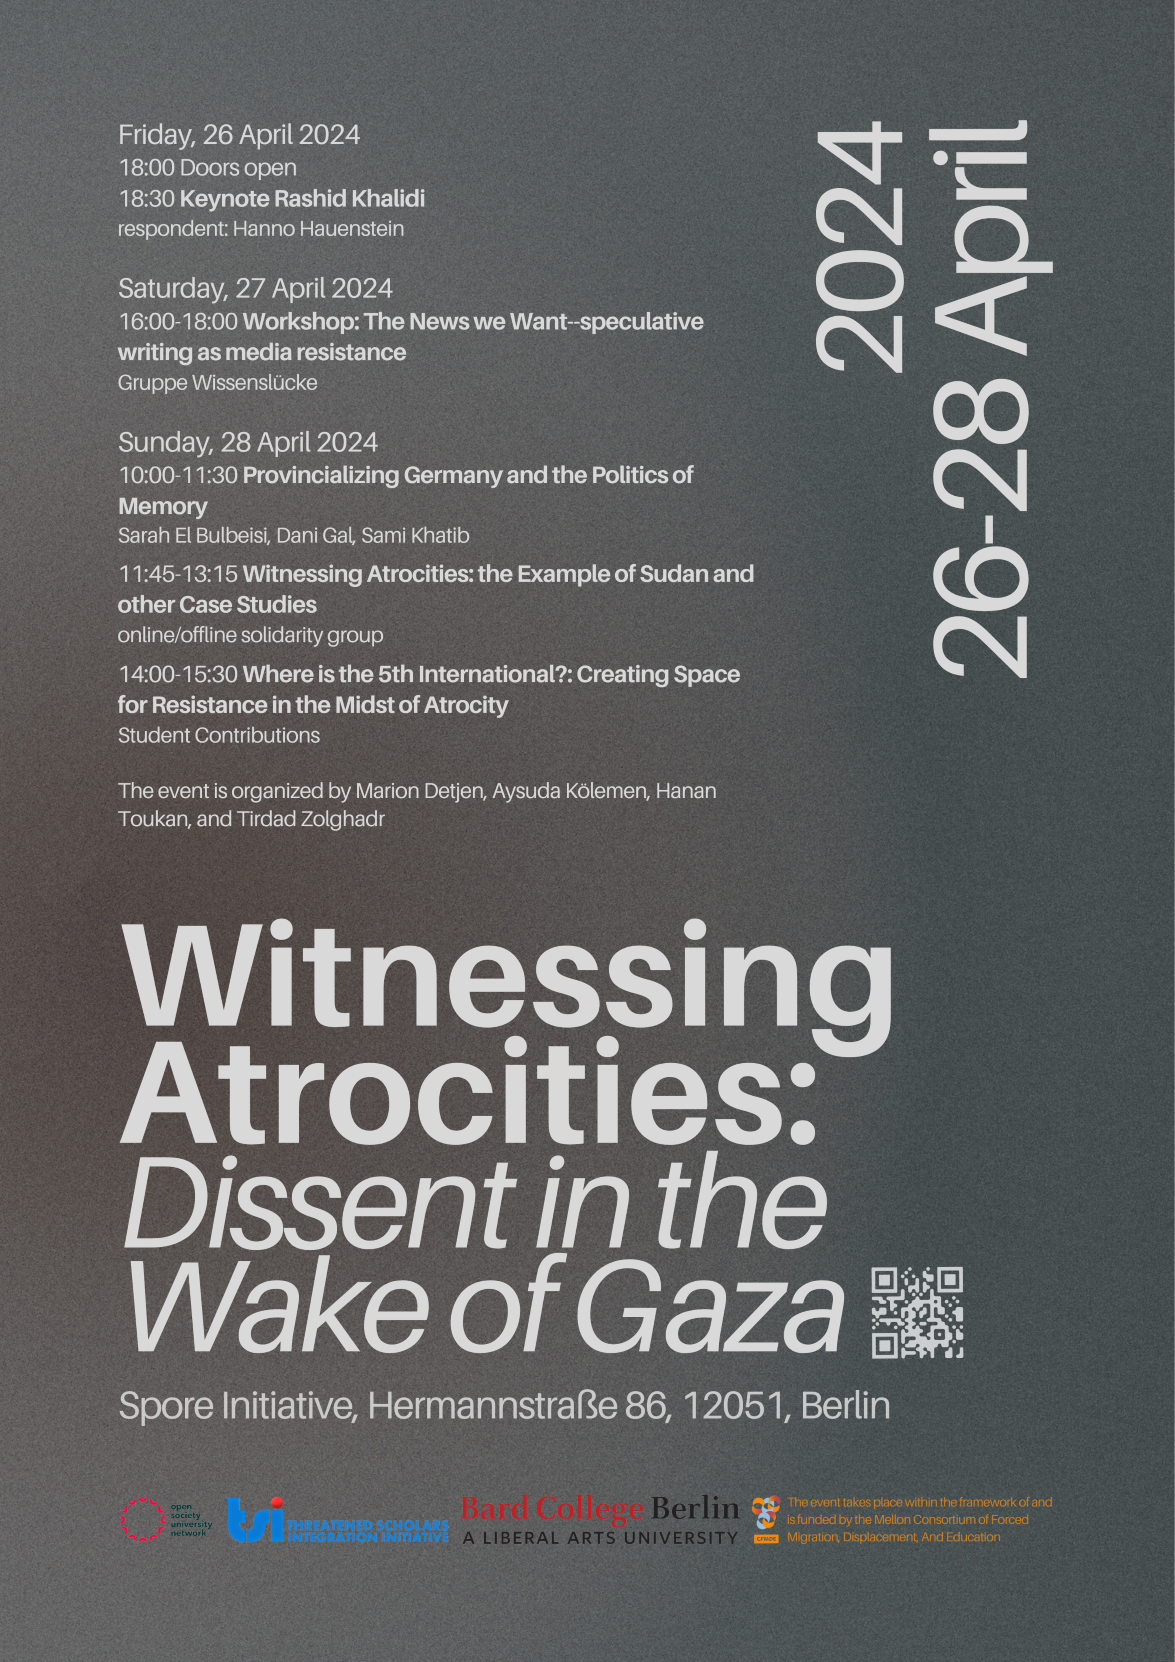 Witnessing Atrocities: Dissent in the Wake of Gaza